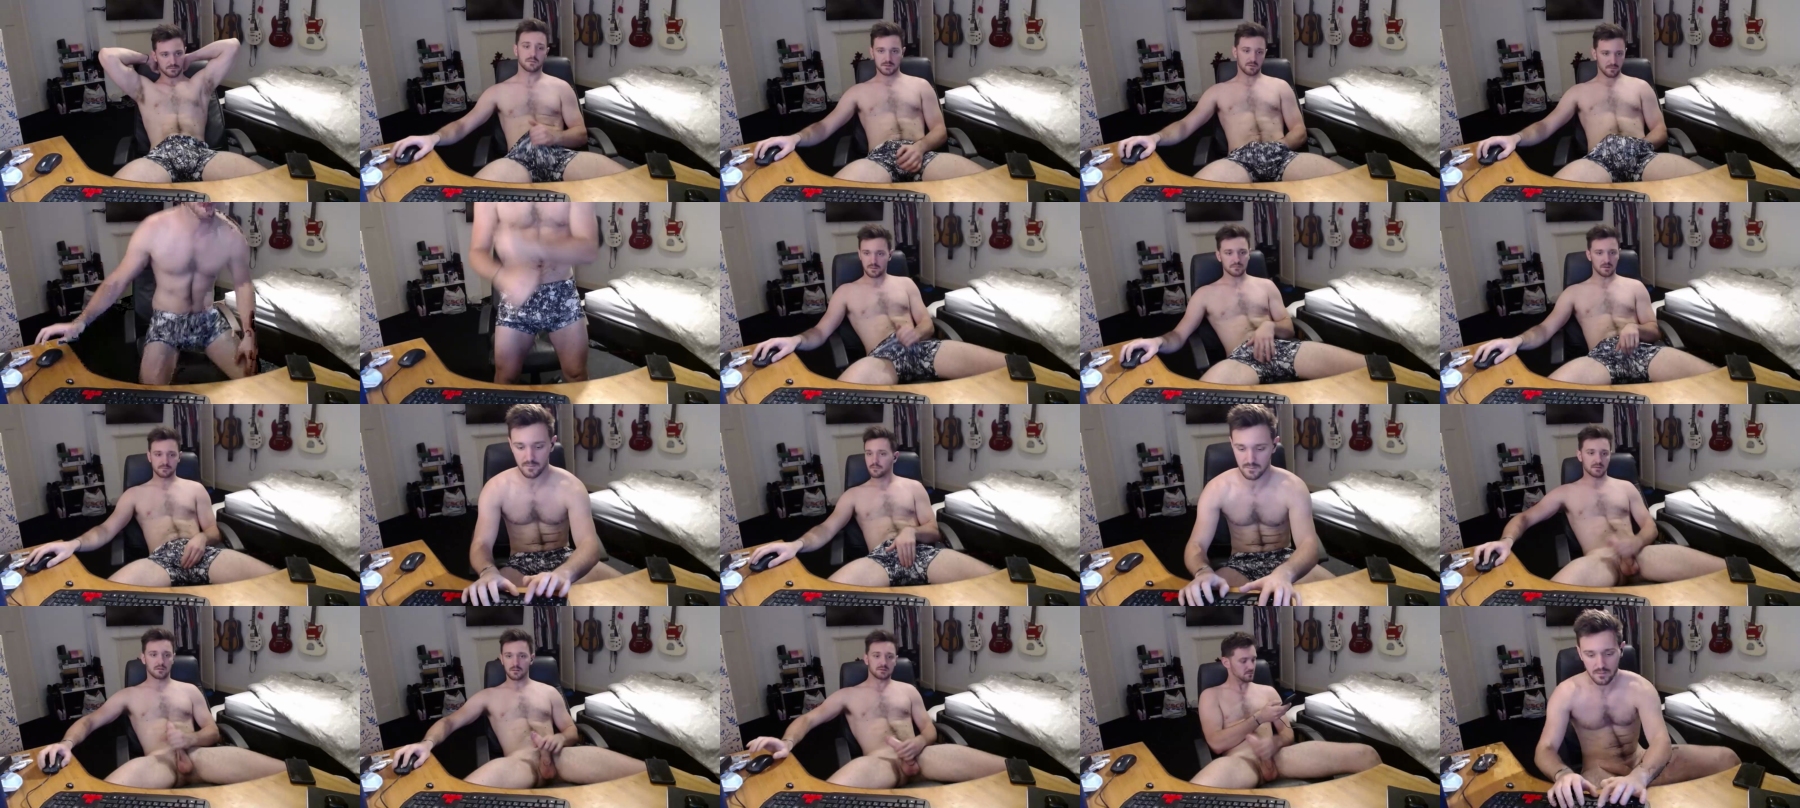 Rugbyboy94 Nude CAM SHOW @ Chaturbate 15-08-2021